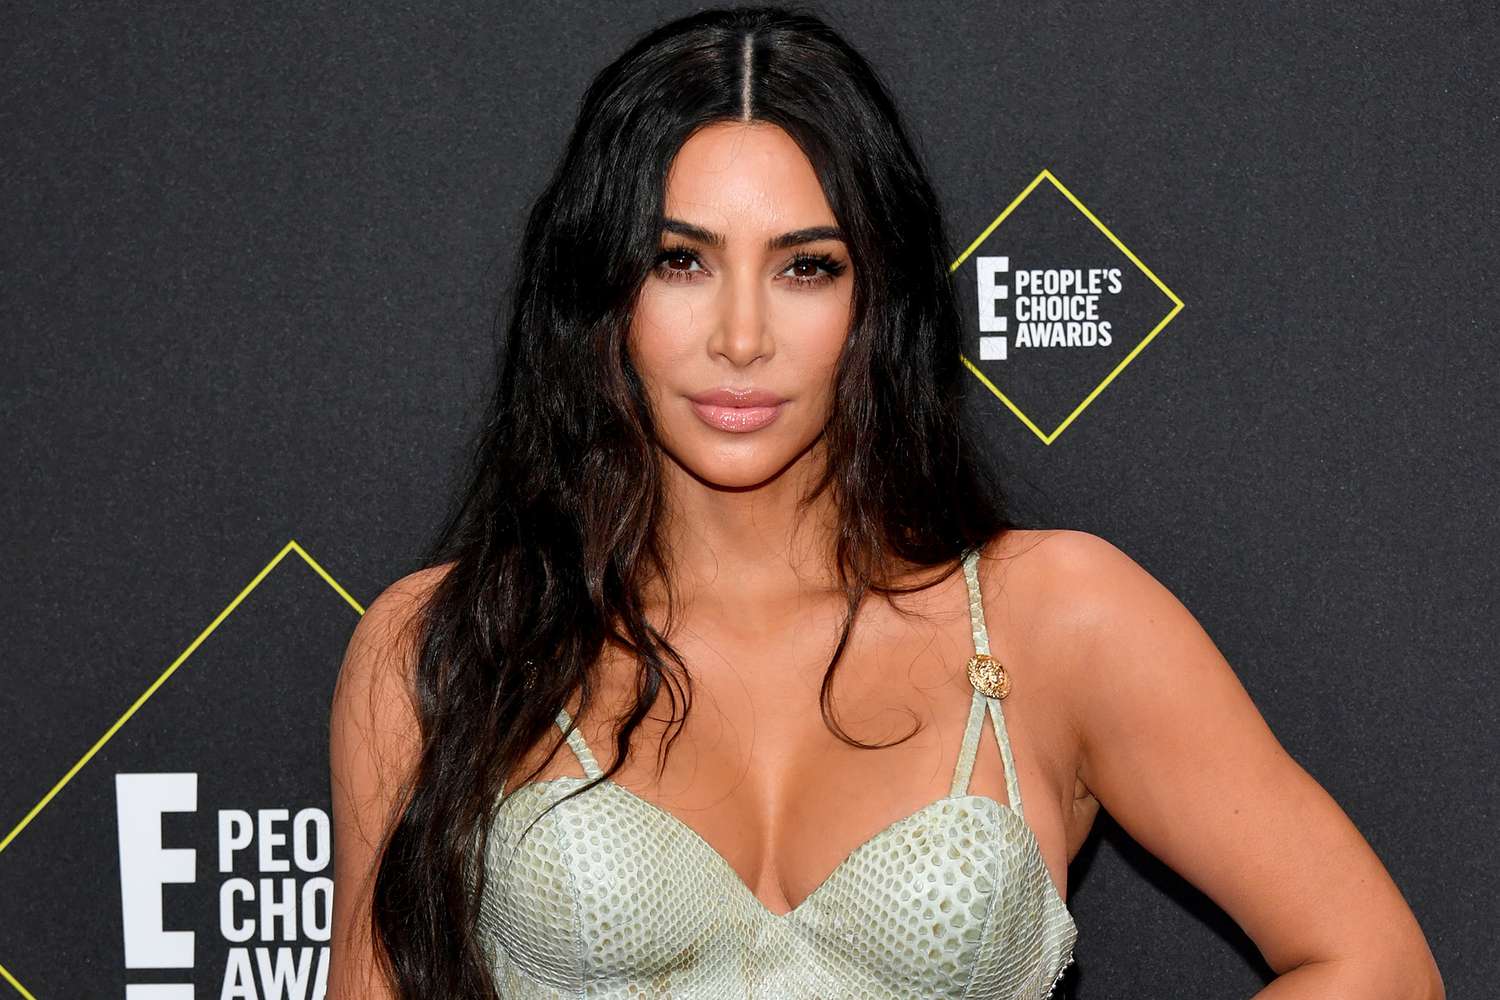 david brumbalow recommends kim kardashian getting pounded pic